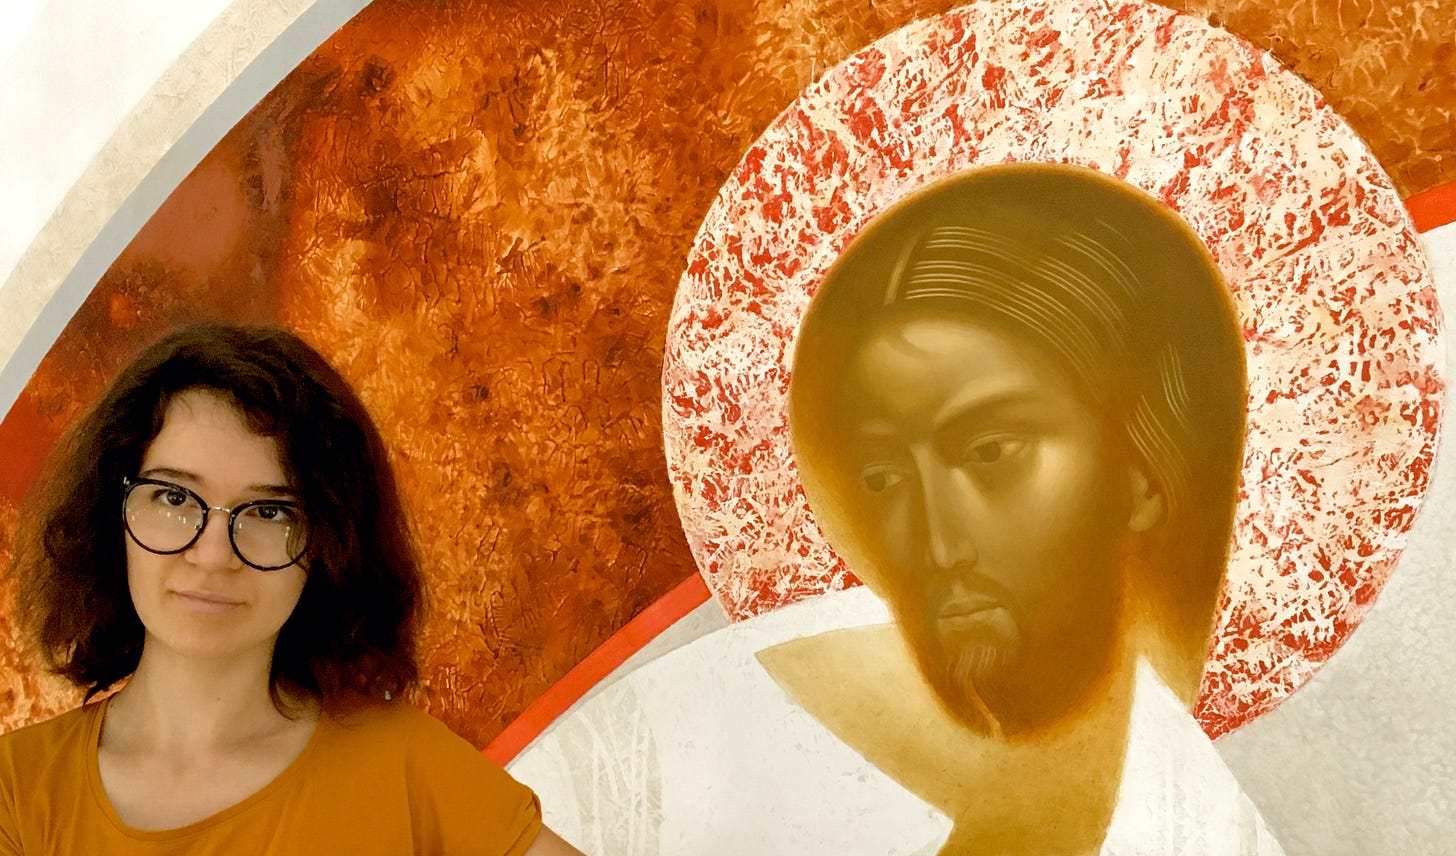 The painter Ivanka Demchuk stands in front of a painting called "Resurrection," which shows Jesus with an orange and white halo behind his head